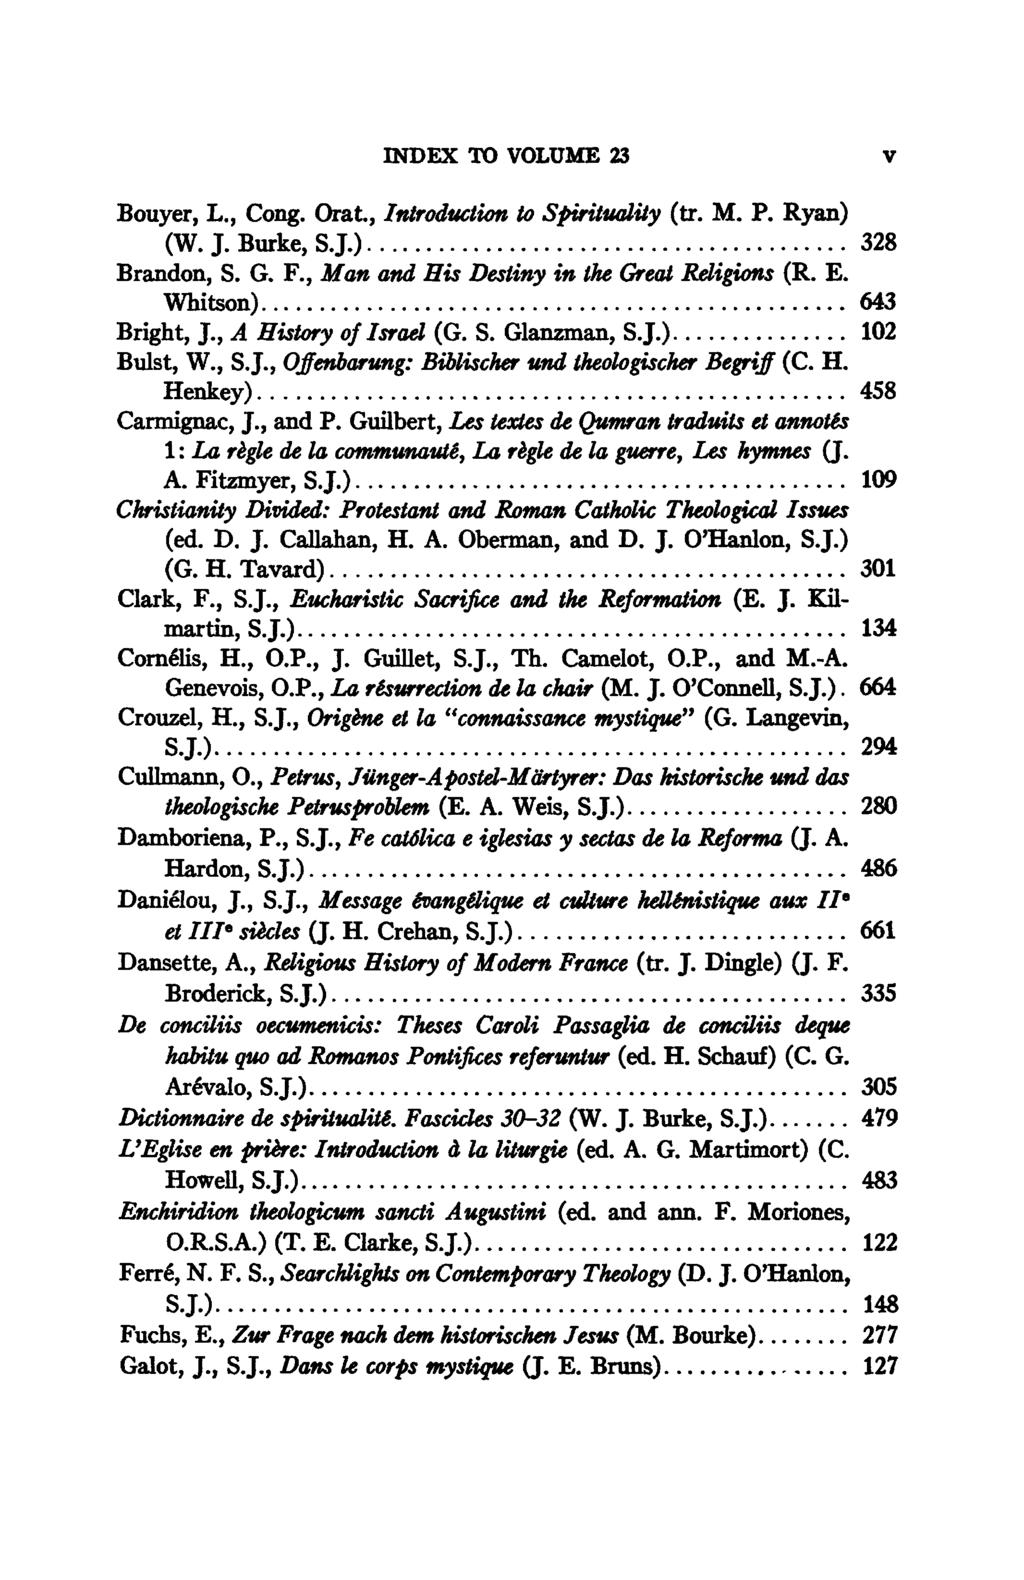 INDEX TO VOLUME 23 ν Bouyer, L., Cong. Orat, Introduction to Spirituality (tr. M. P. Ryan) (W. J. Burke, S J.) 328 Brandon, S. G. F., Man and His Destiny in il Great Religions (R. E.